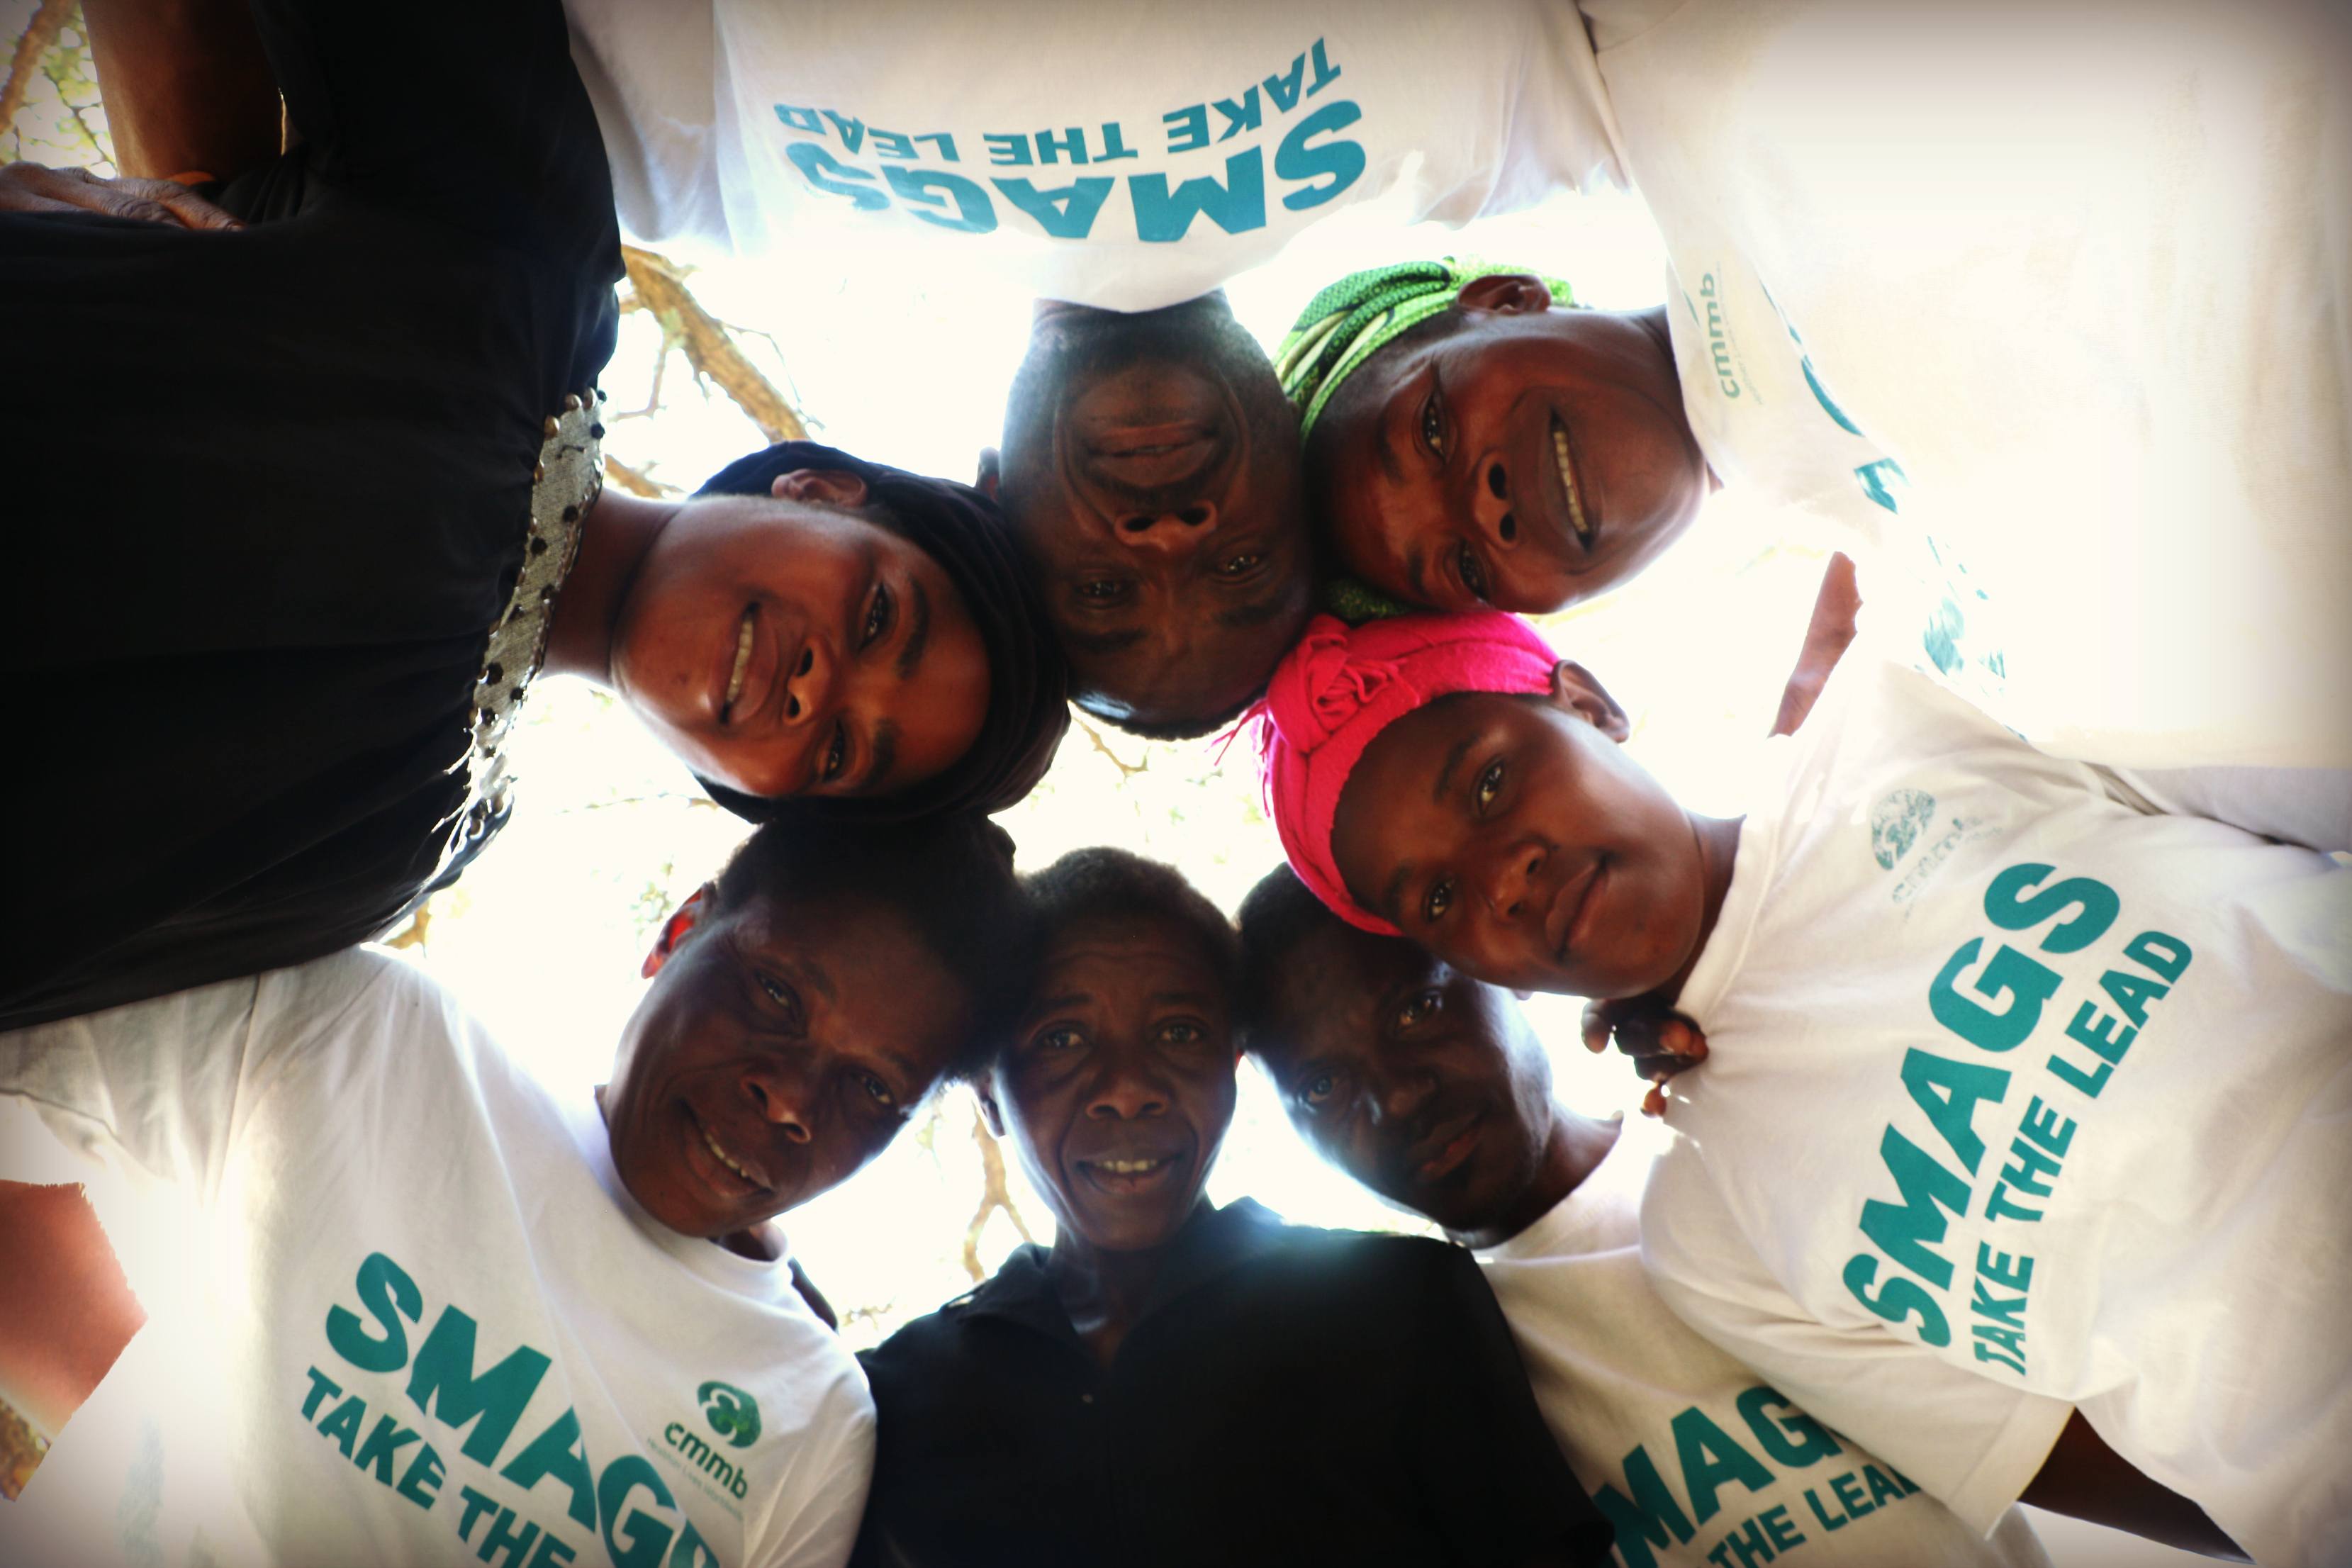 "Together we are stronger" - community health workers in Zambia rely on each other